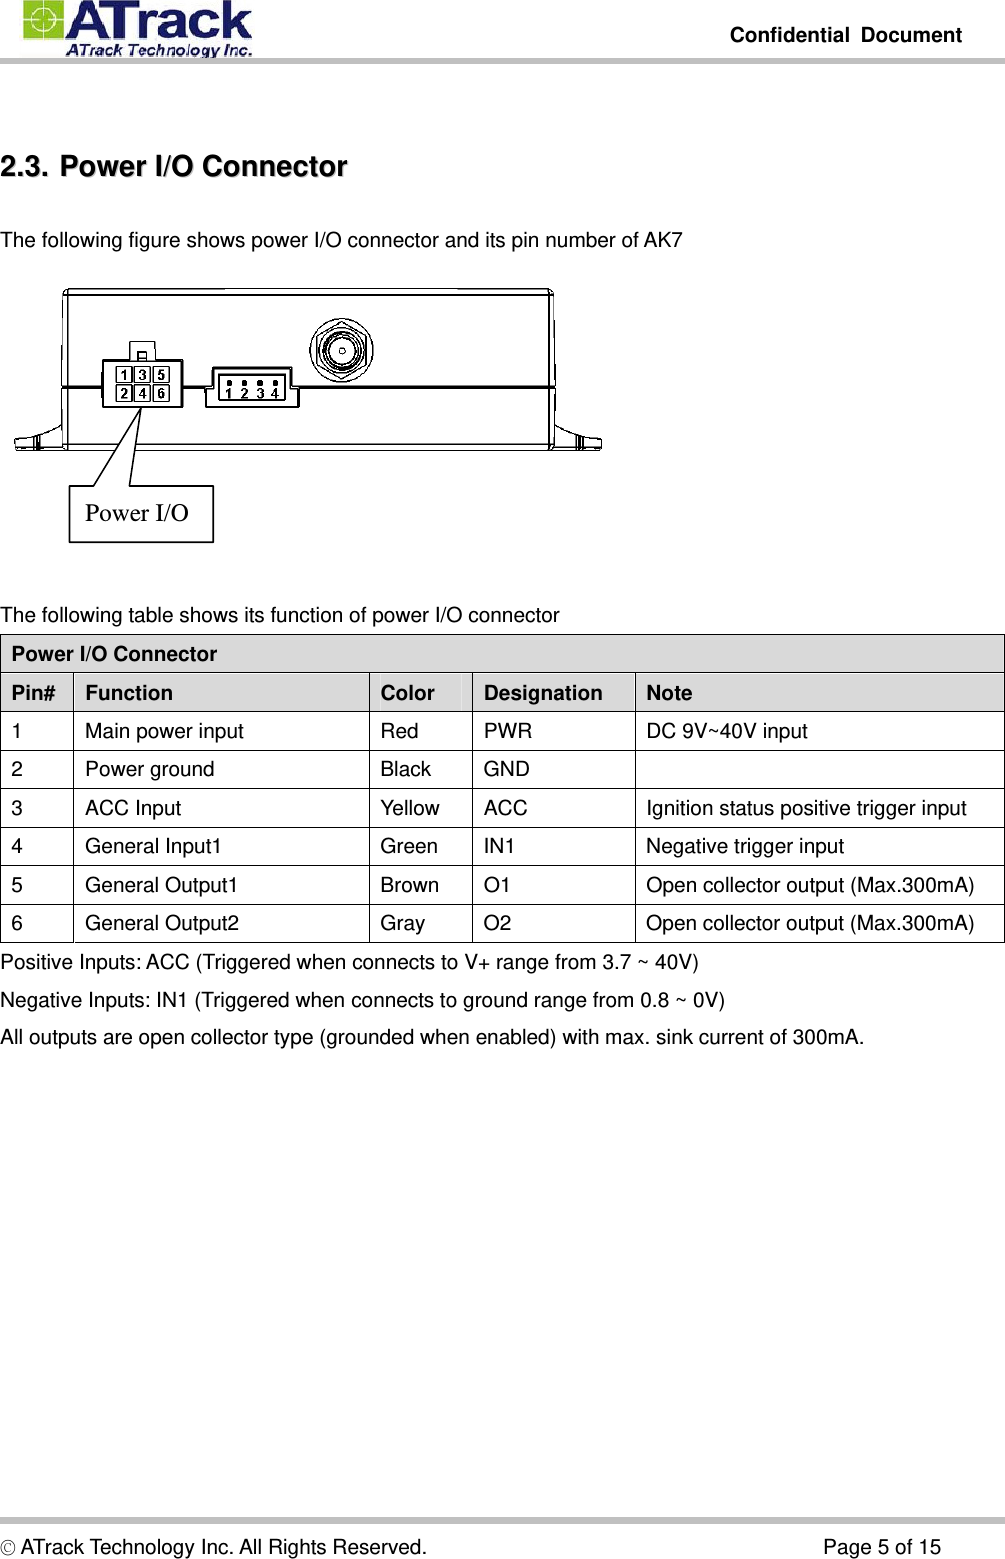         Confidential Document  © ATrack Technology Inc. All Rights Reserved.                                      Page 5 of 15  22..33..  PPoowweerr  II//OO  CCoonnnneeccttoorr  The following figure shows power I/O connector and its pin number of AK7     The following table shows its function of power I/O connector Power I/O Connector Pin#  Function  Color  Designation  Note 1  Main power input  Red  PWR  DC 9V~40V input 2 Power ground  Black GND   3  ACC Input  Yellow  ACC  Ignition status positive trigger input 4  General Input1  Green  IN1  Negative trigger input 5 General Output1  Brown O1  Open collector output (Max.300mA) 6  General Output2  Gray  O2  Open collector output (Max.300mA) Positive Inputs: ACC (Triggered when connects to V+ range from 3.7 ~ 40V) Negative Inputs: IN1 (Triggered when connects to ground range from 0.8 ~ 0V) All outputs are open collector type (grounded when enabled) with max. sink current of 300mA. Power I/O 